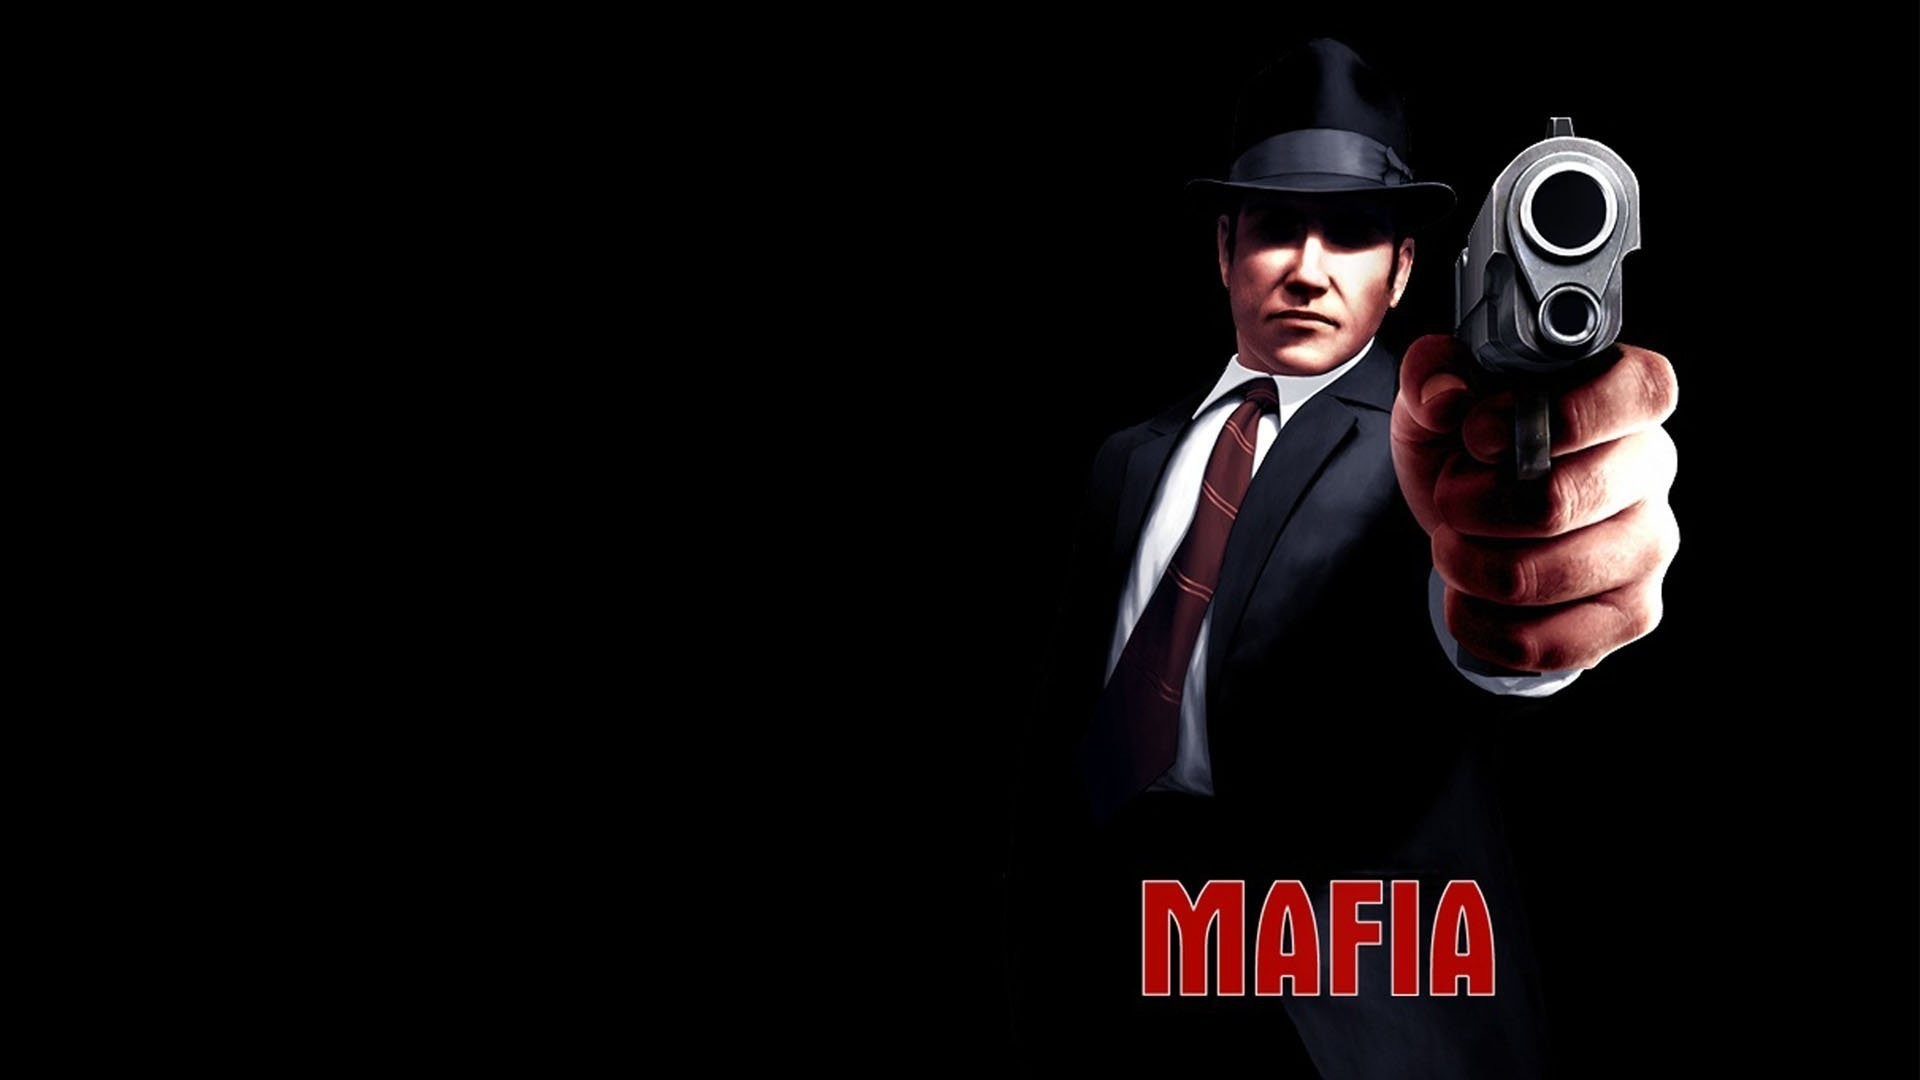 1920x1080  Mafia 2 Wallpaper 3 collection of wallpapers uploaded by Preston.  Download Mafia 2 Wallpaper wallpapers for desktop,laptop free.